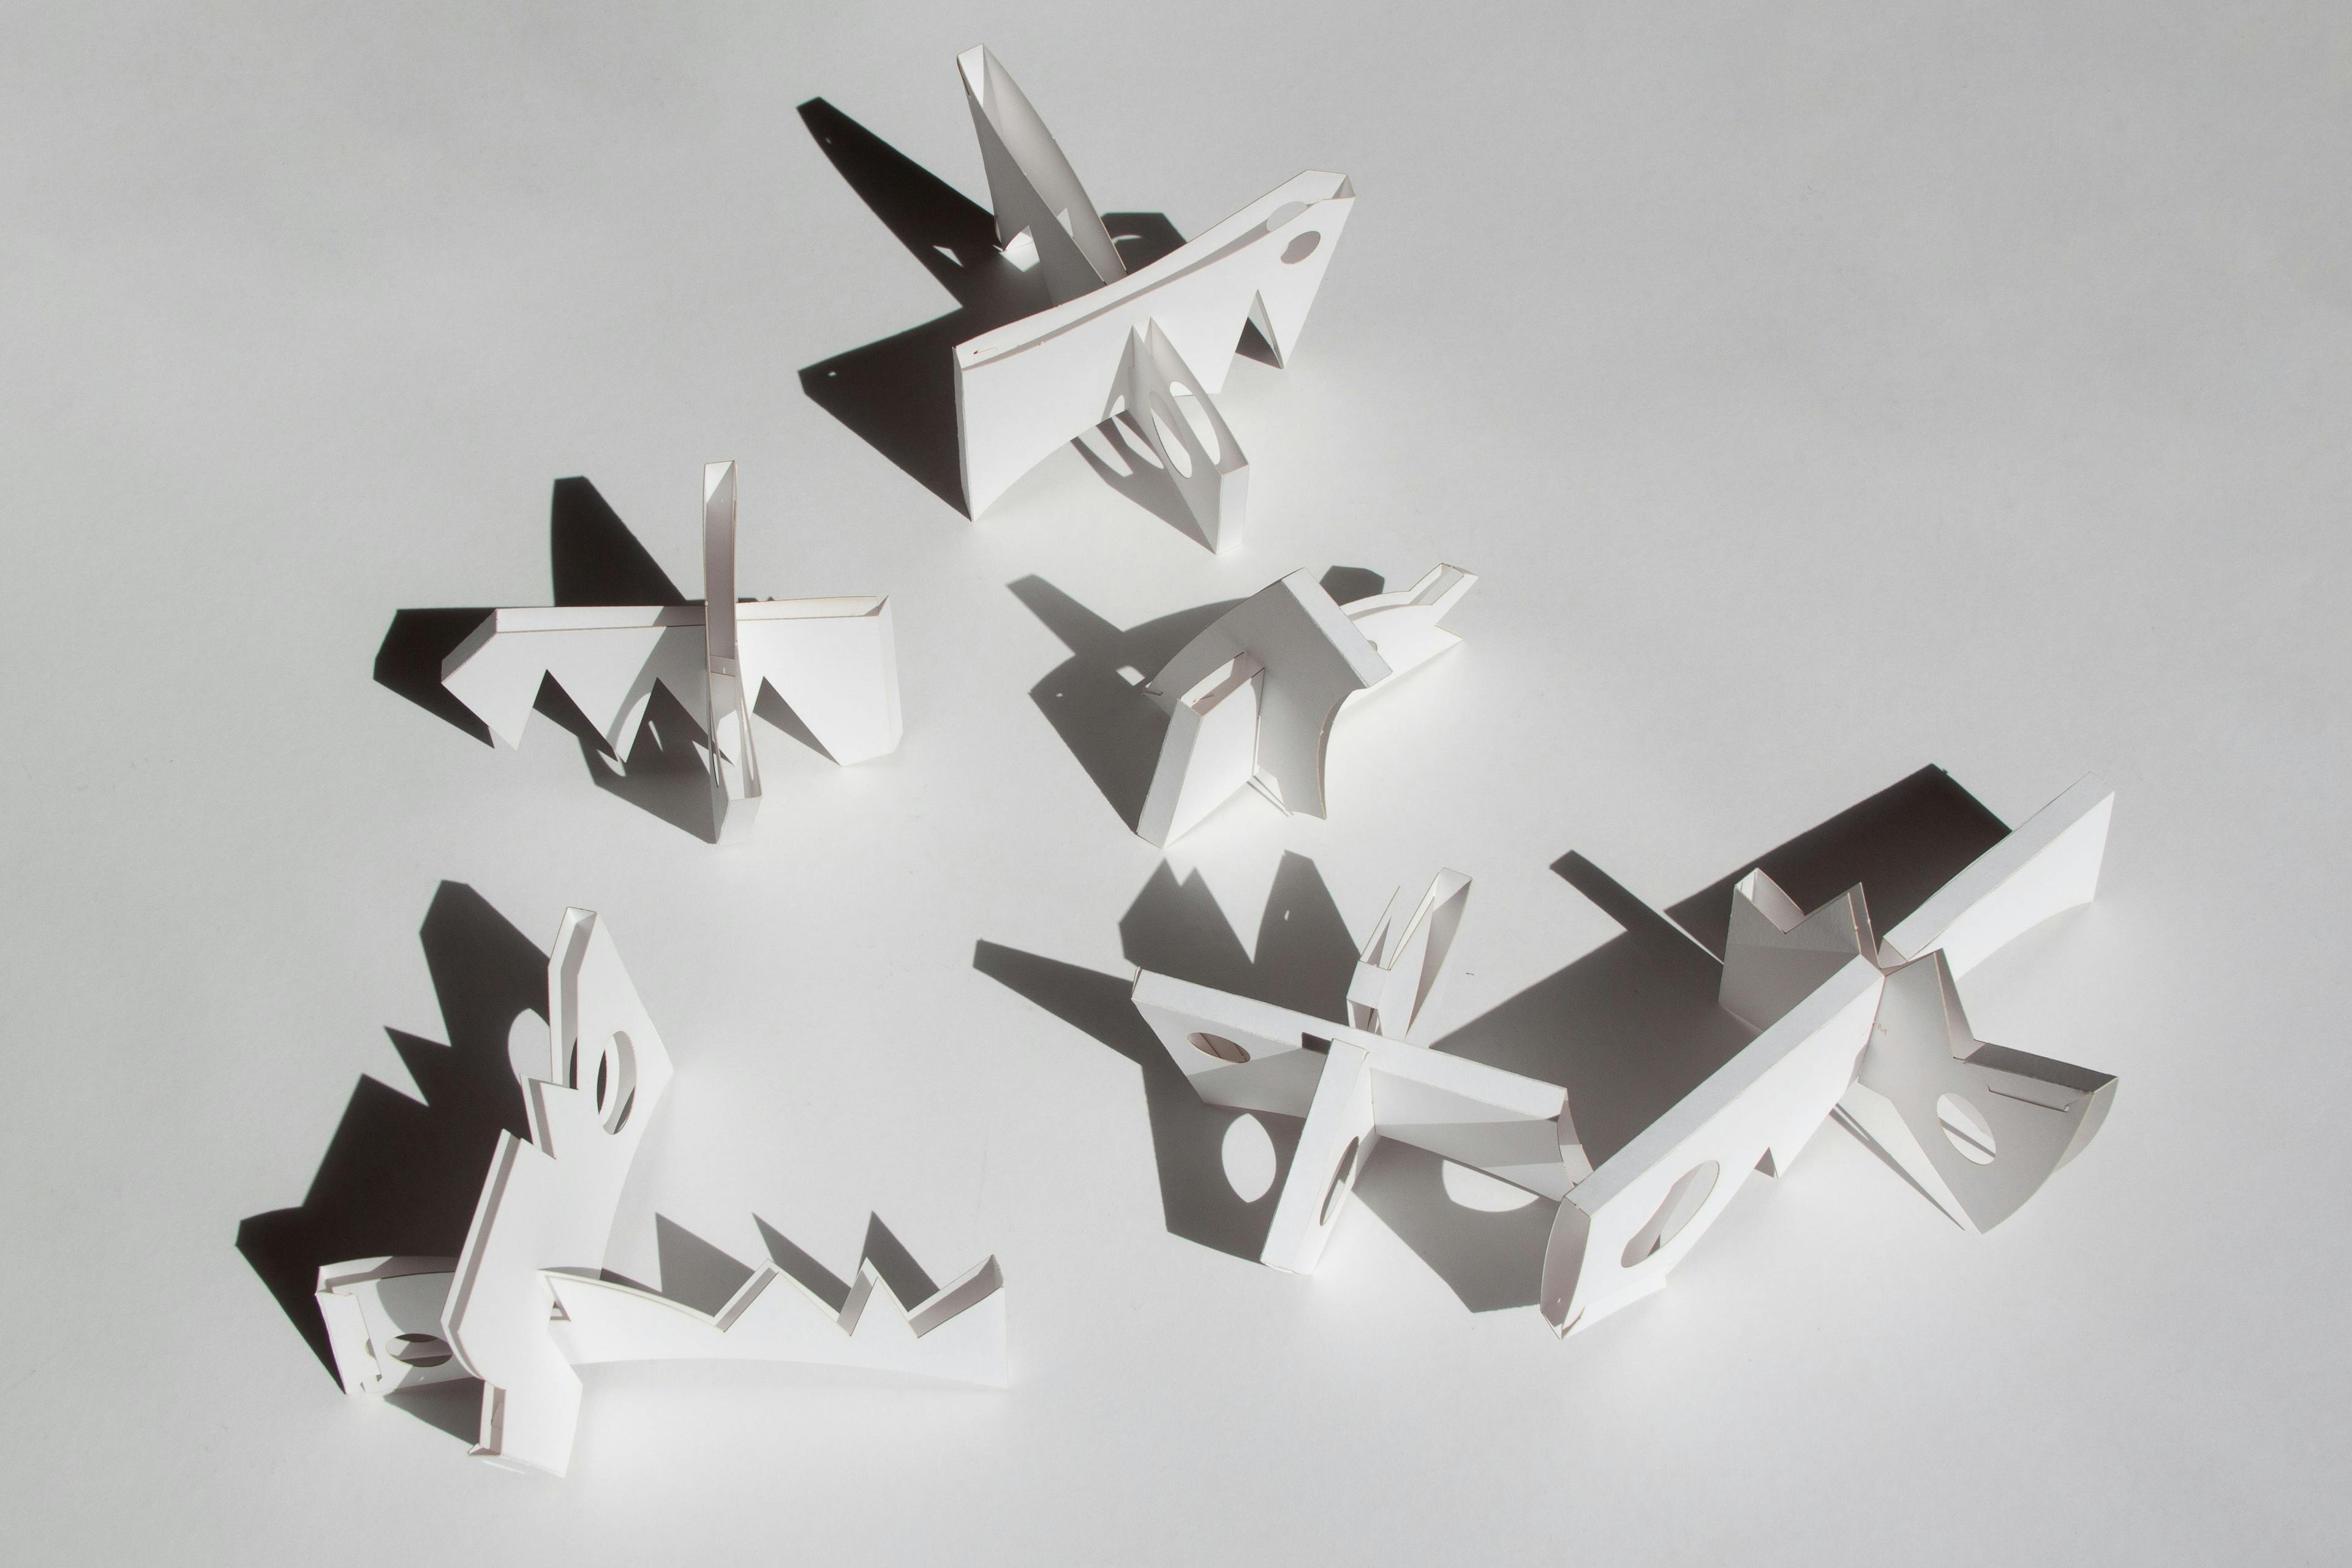 Sculpture by Fitzhugh Karol titled "To and From (Paper Maquettes)".